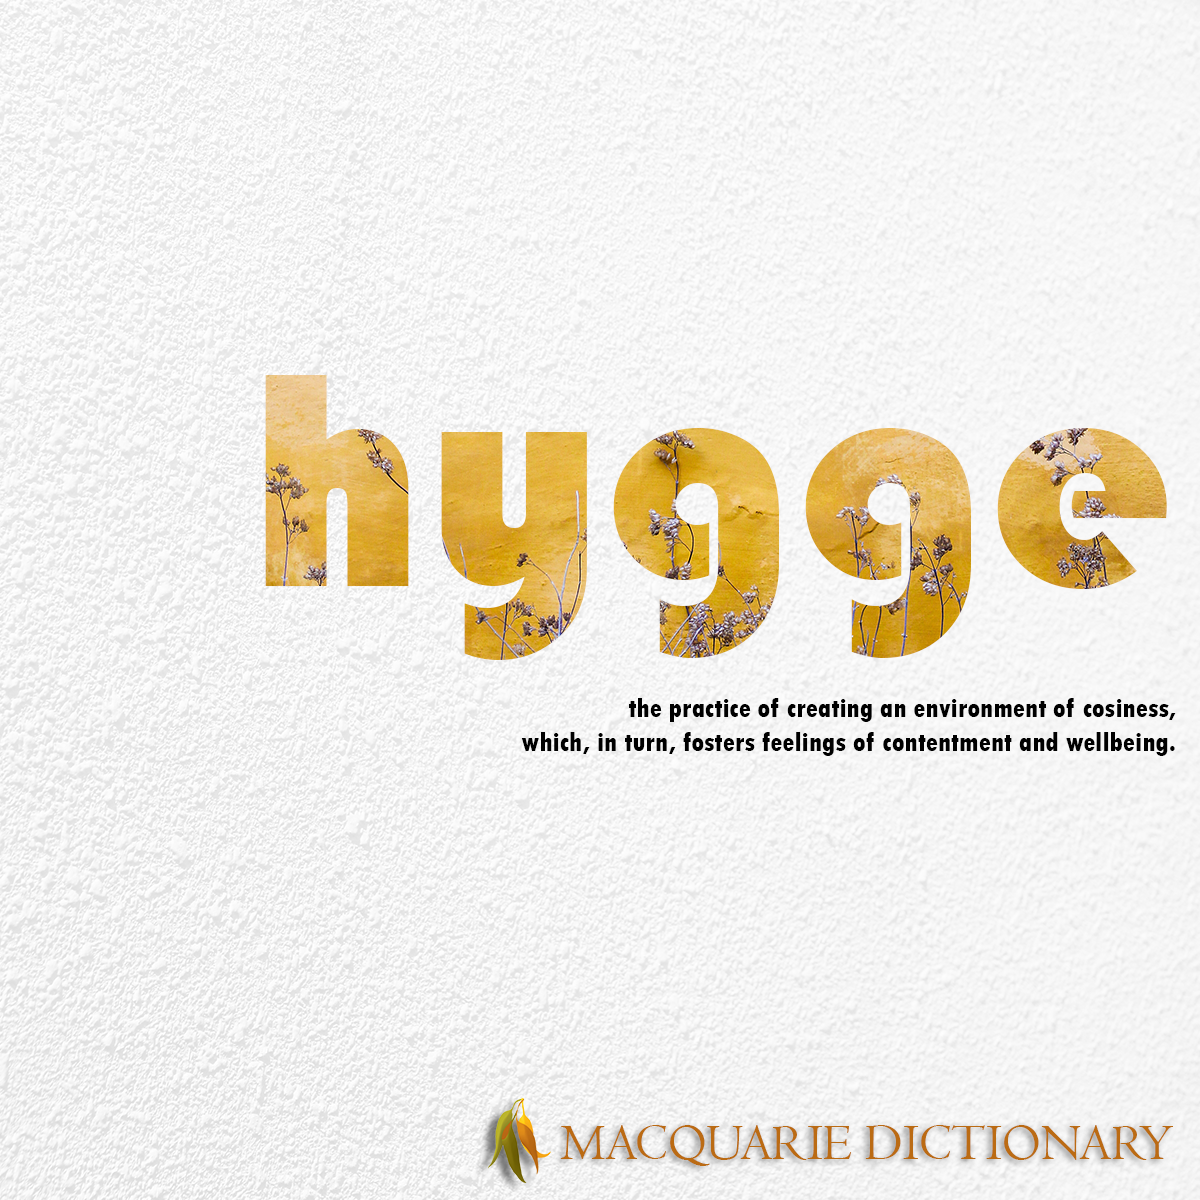 Image of Macquarie Dictionary Word of the Year - hygge - the practice of creating an environment of cosiness, which, in turn, fosters feelings of contentment and wellbeing.